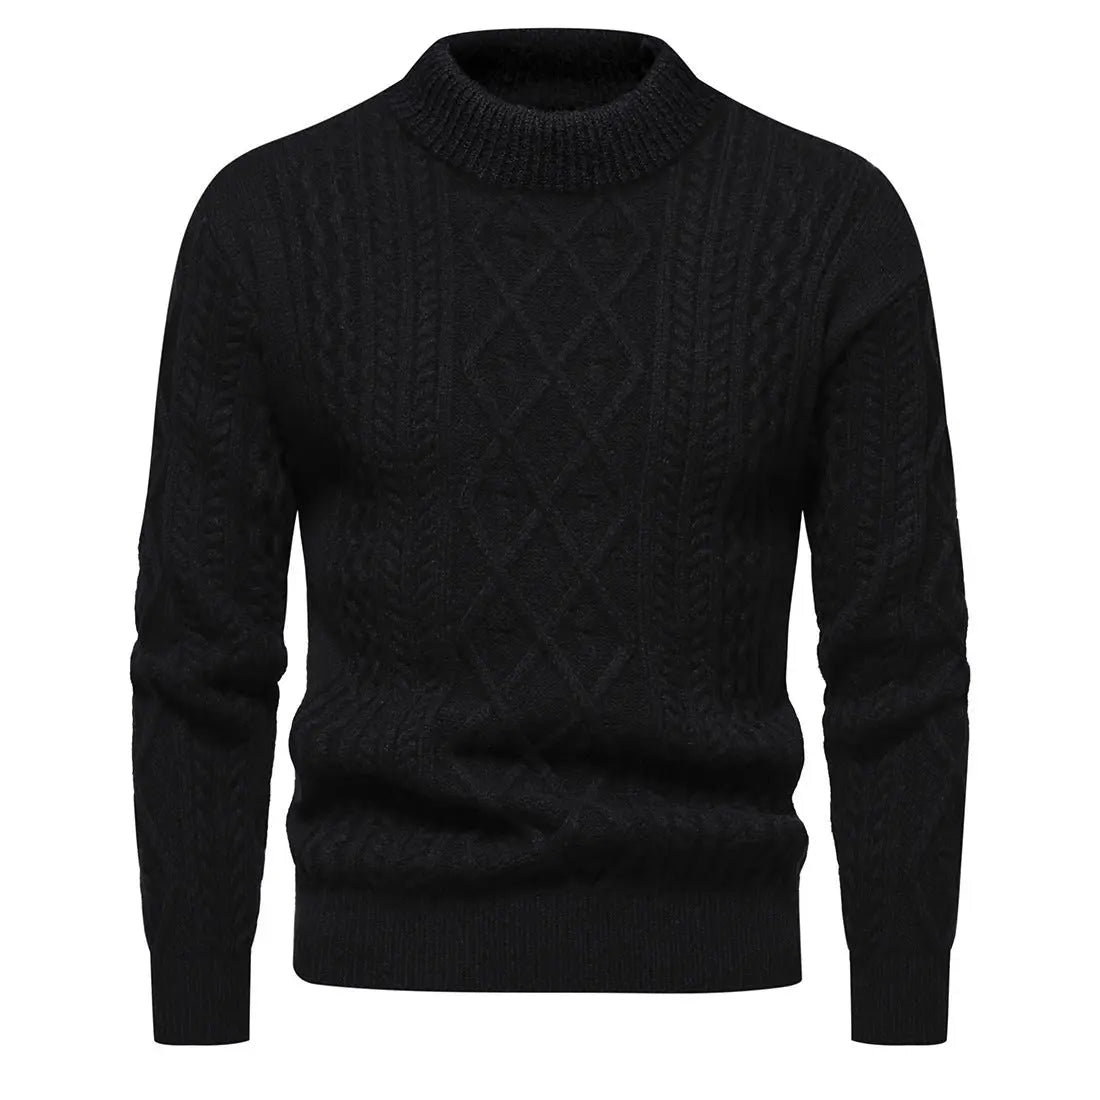 Men's Solid Color Round Neck Sweater Bottoming Shirt - Image #3